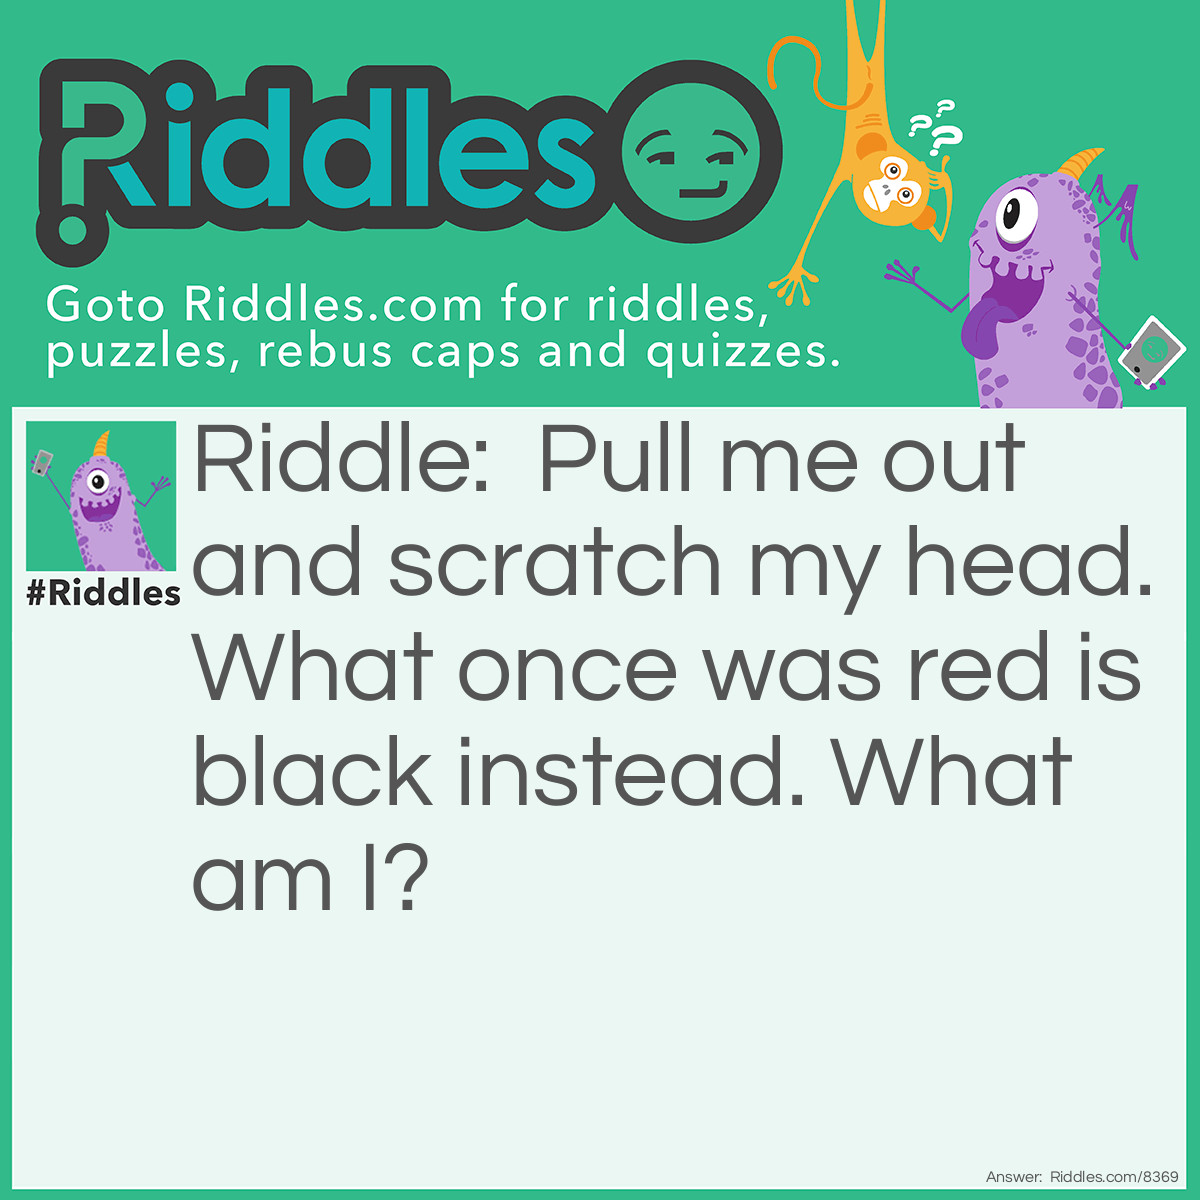 Riddle: Pull me out and scratch my head. What once was red is black instead. What am I? Answer: a match